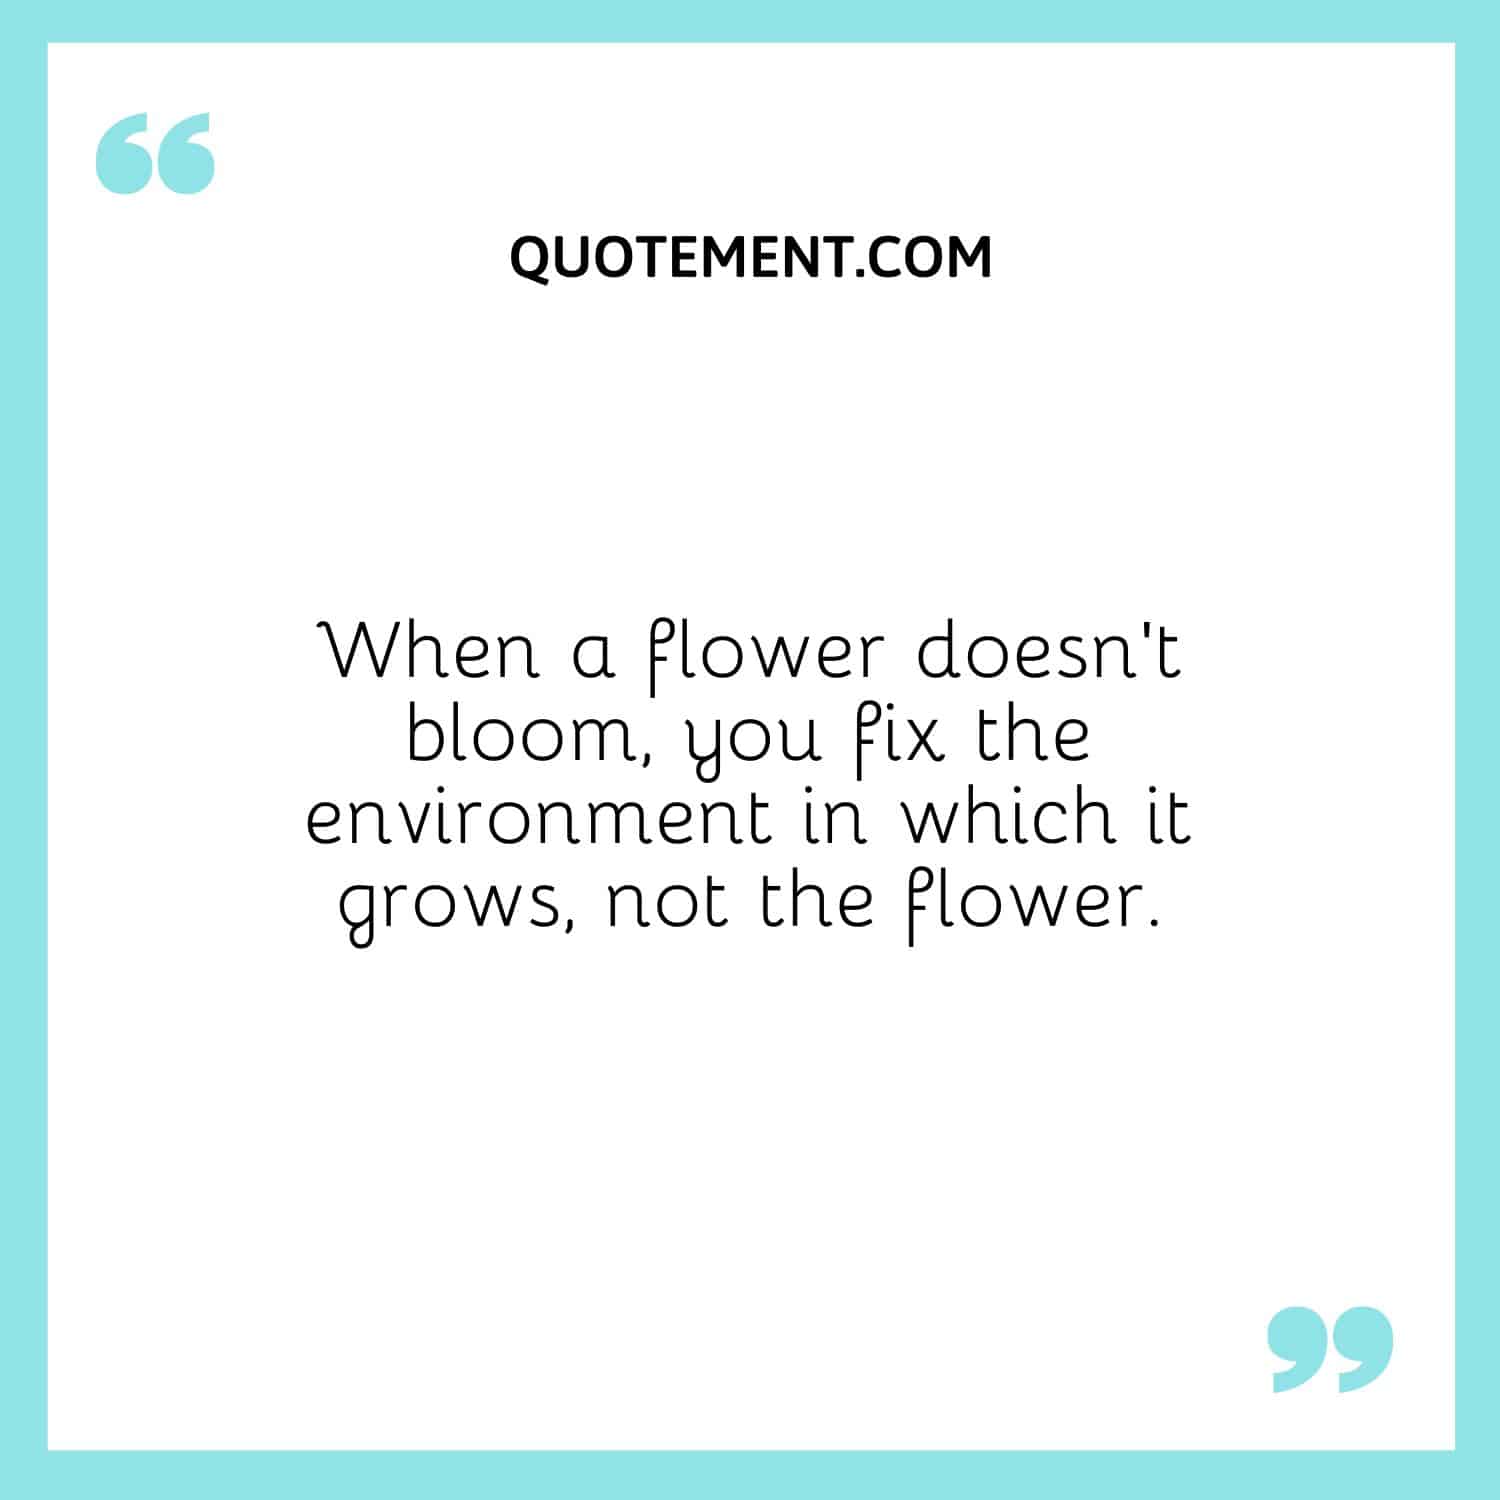 When a flower doesn't bloom, you fix the environment in which it grows, not the flower